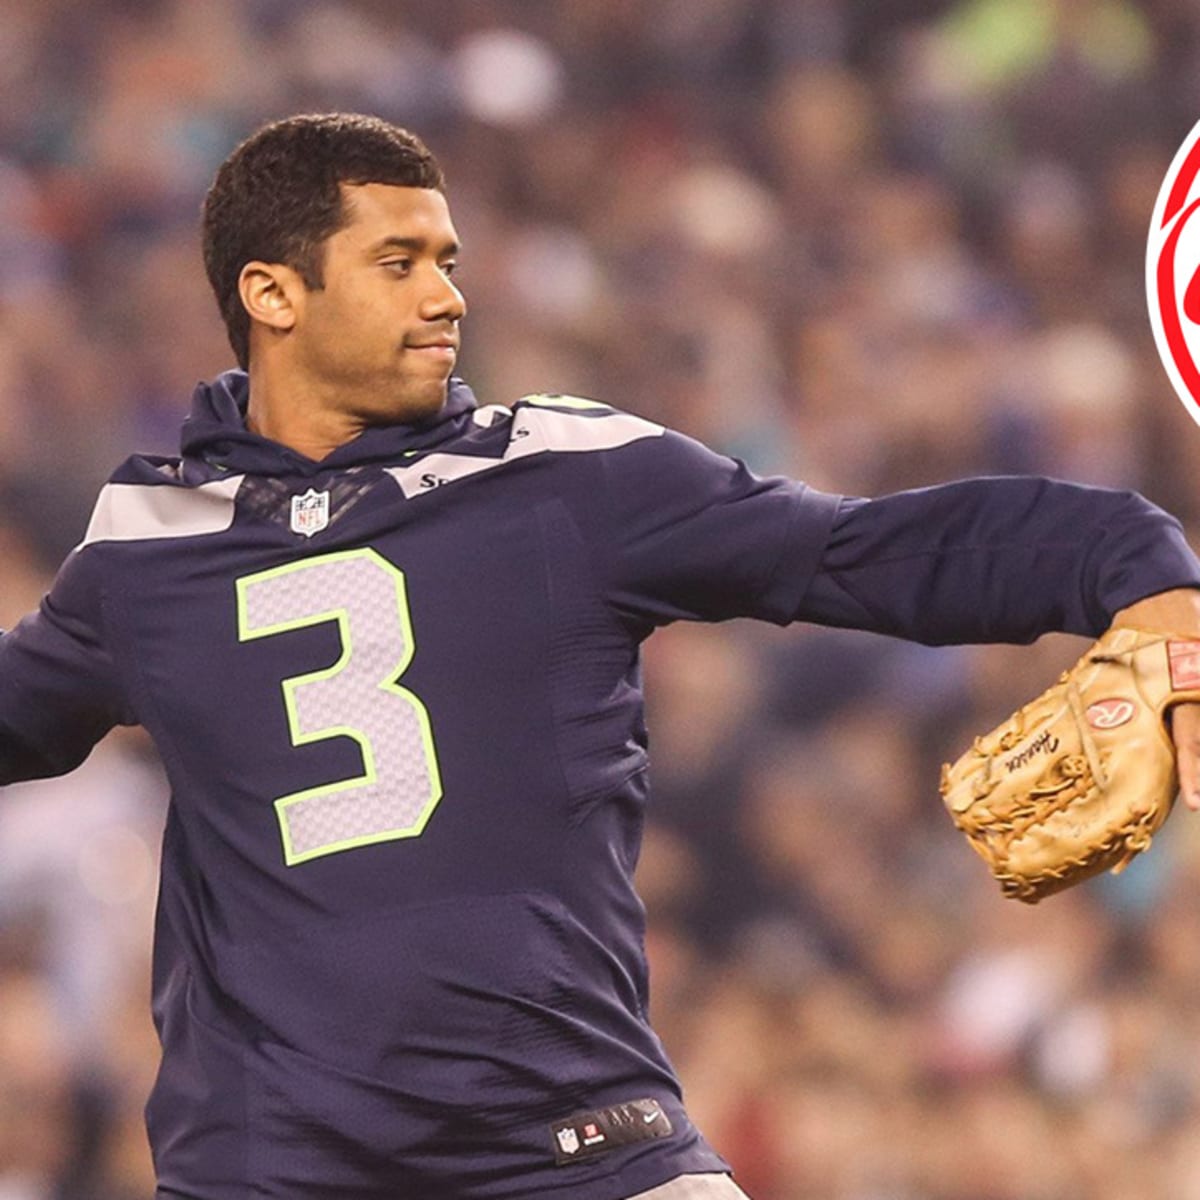 Russell Wilson's Baseball Rights Traded to Yankees - Sports